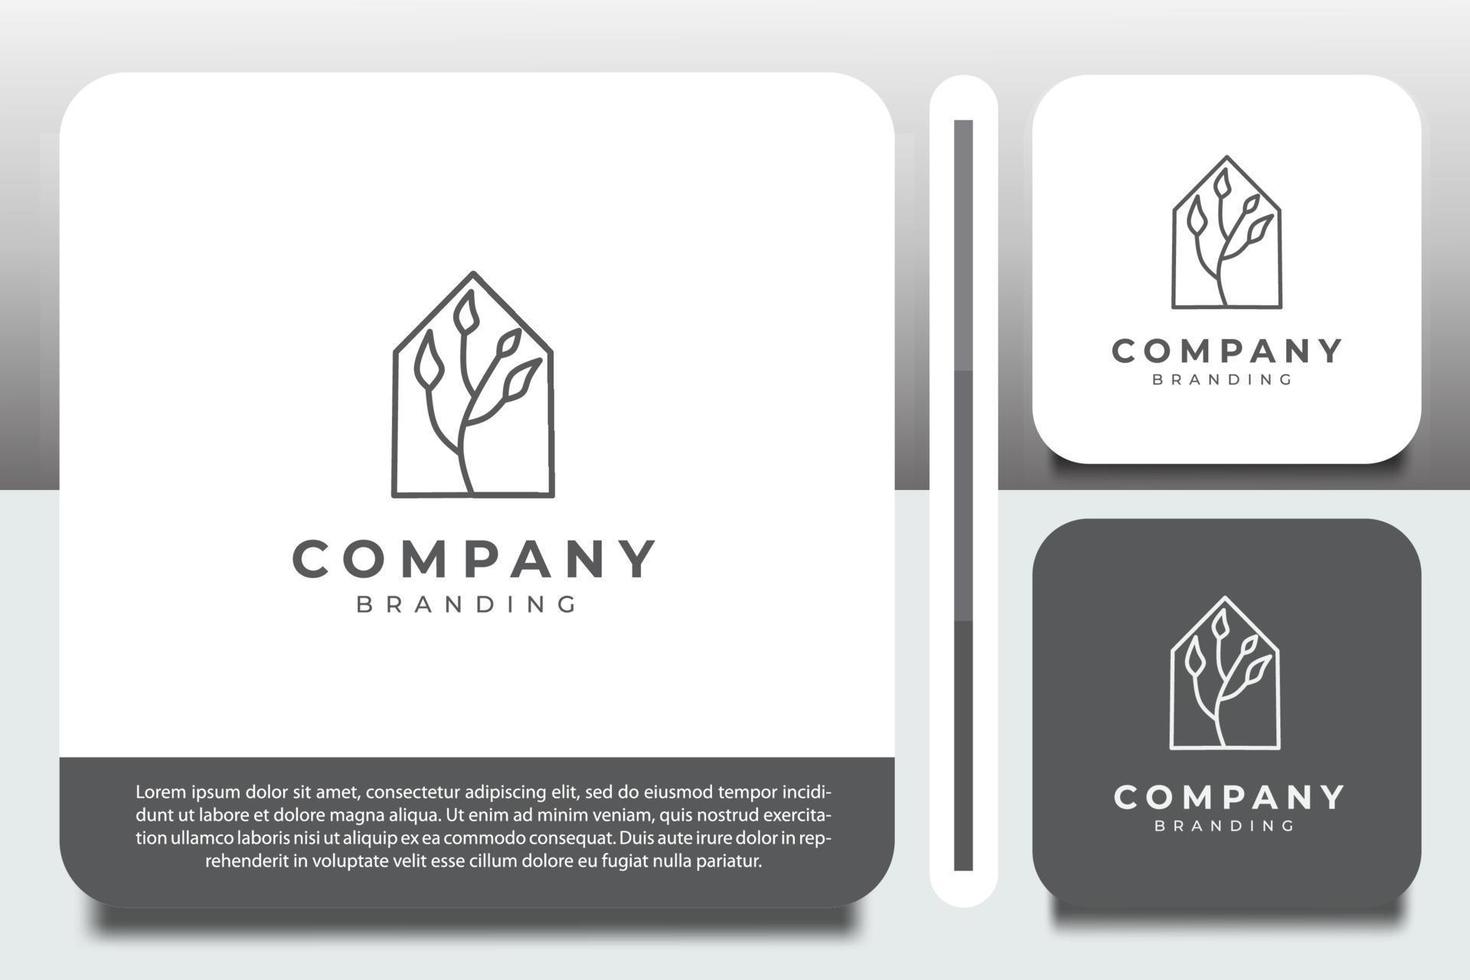 monochrome logo design template, with tree and plant icons vector